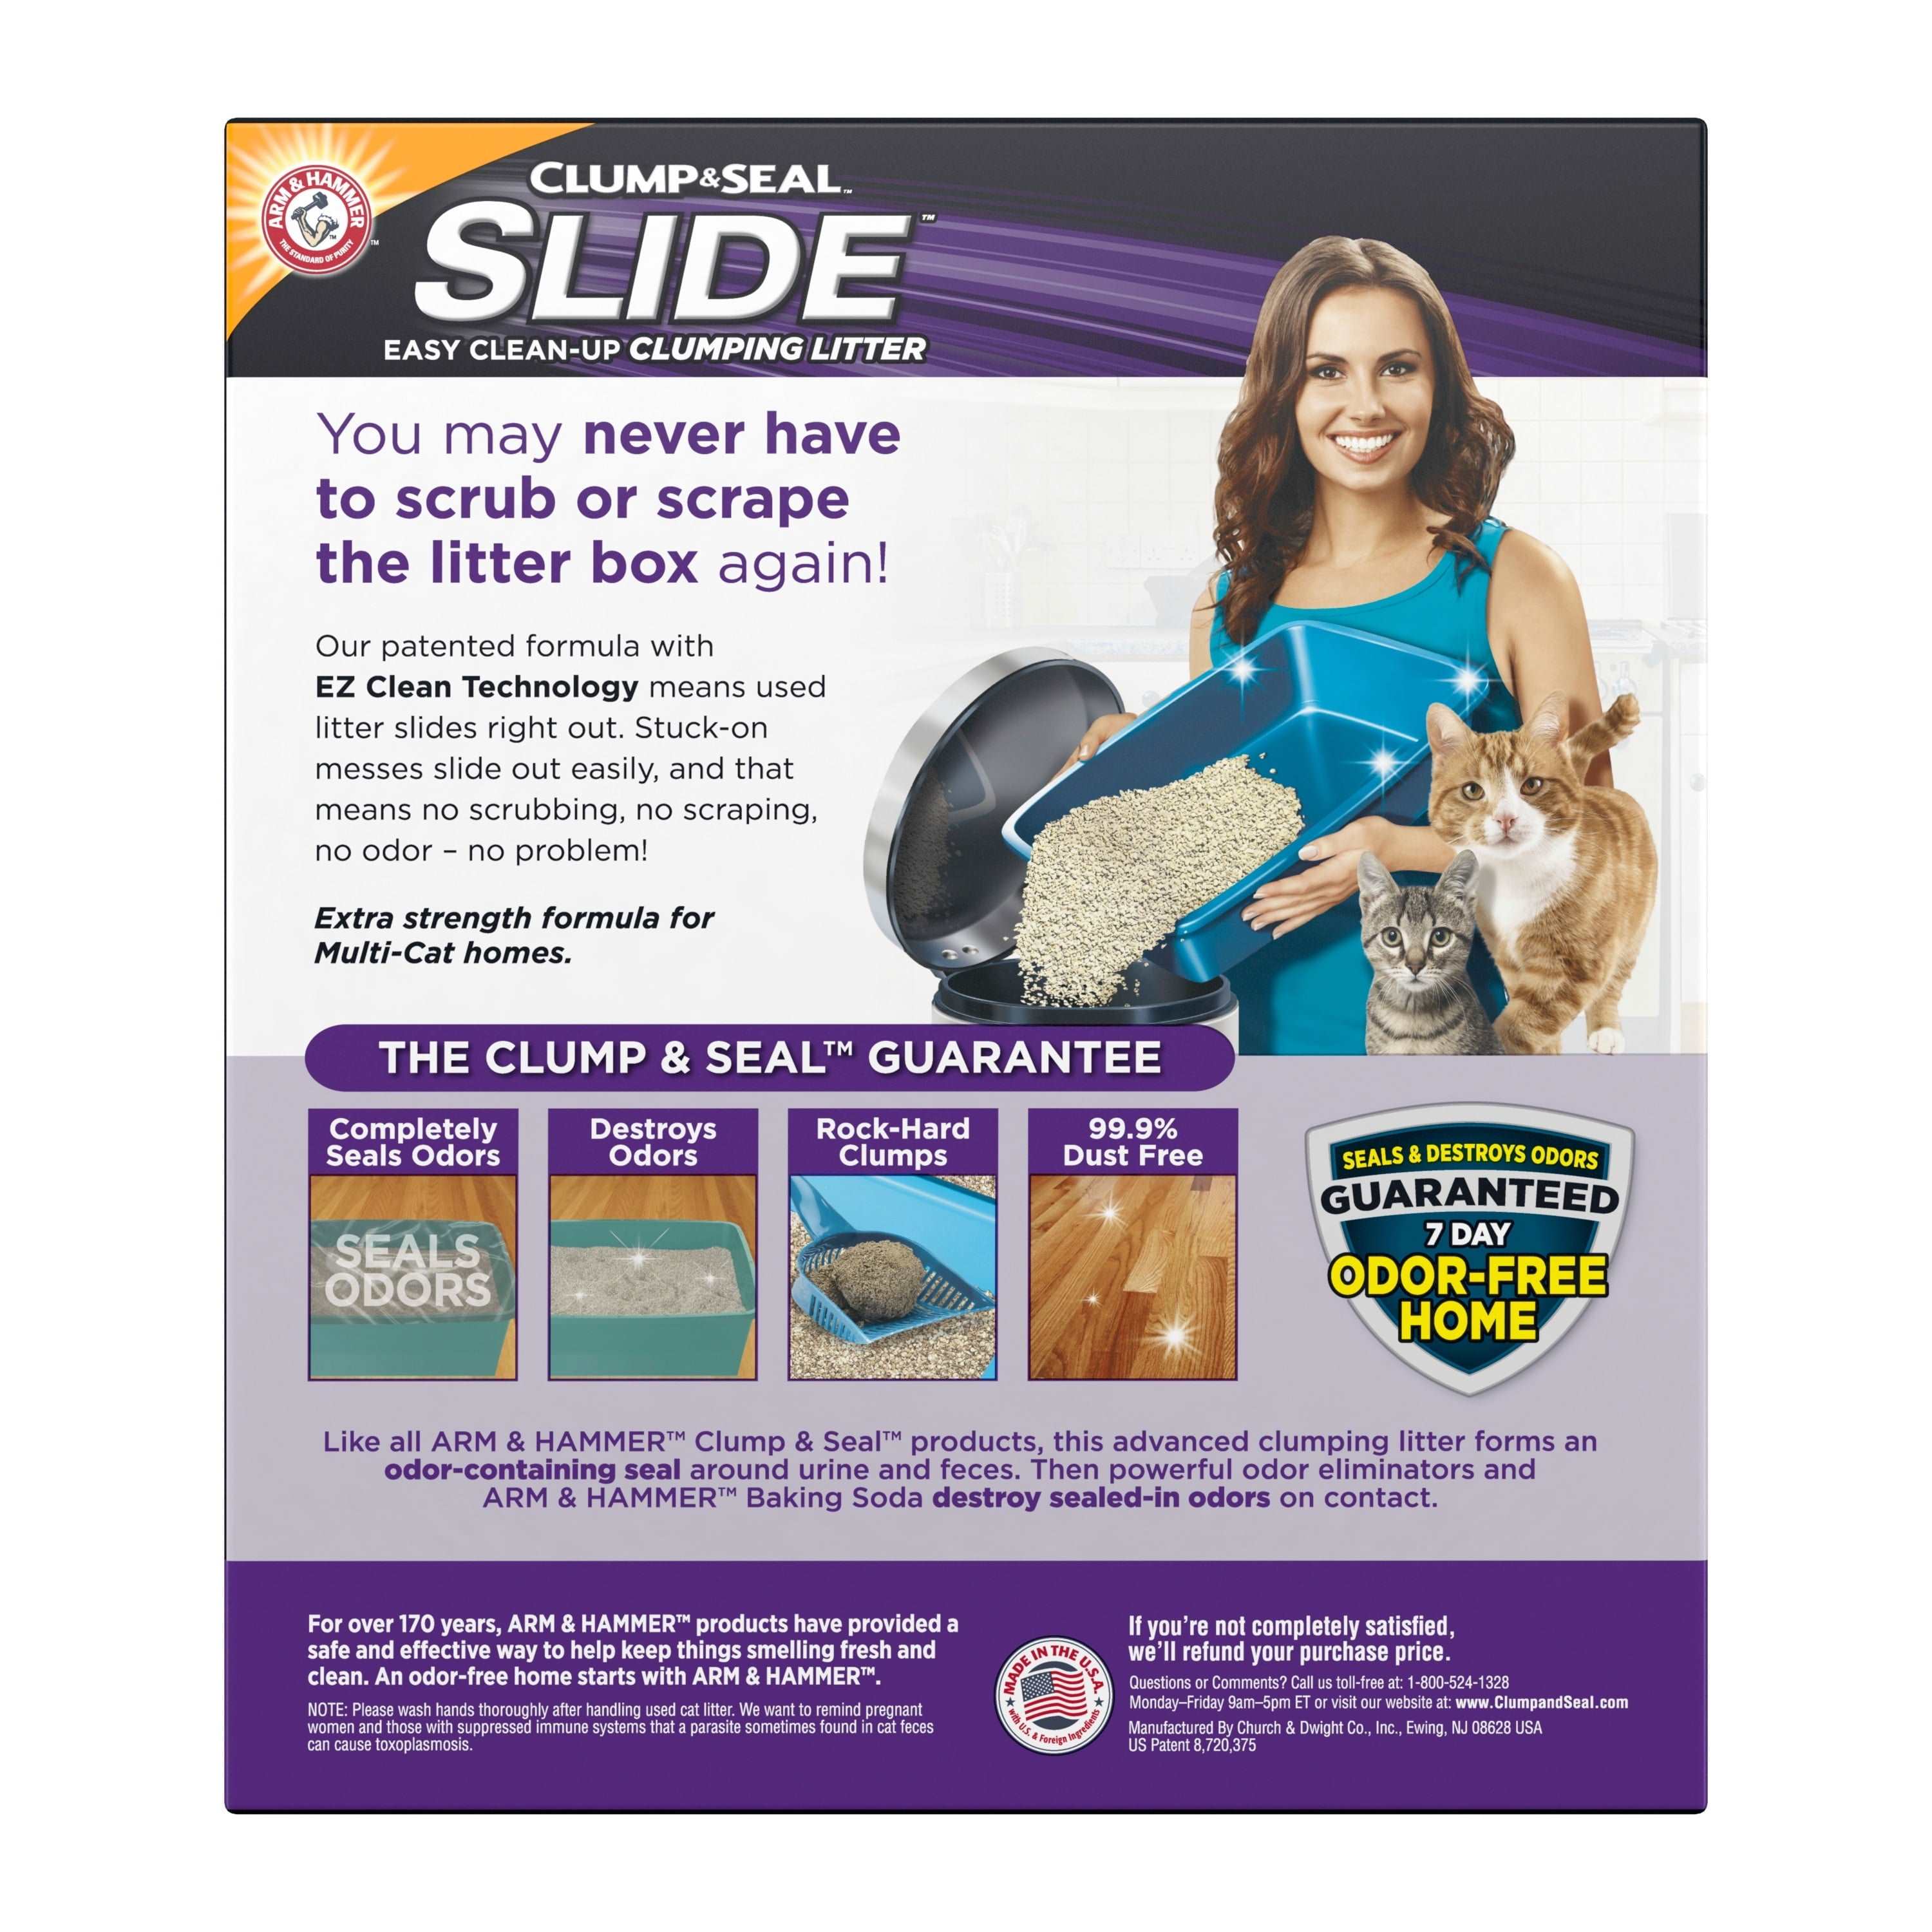 Wholesale prices with free shipping all over United States Arm & Hammer SLIDE Easy Clean-Up Multi-Cat Clumping Cat Litter, 38lb - Steven Deals